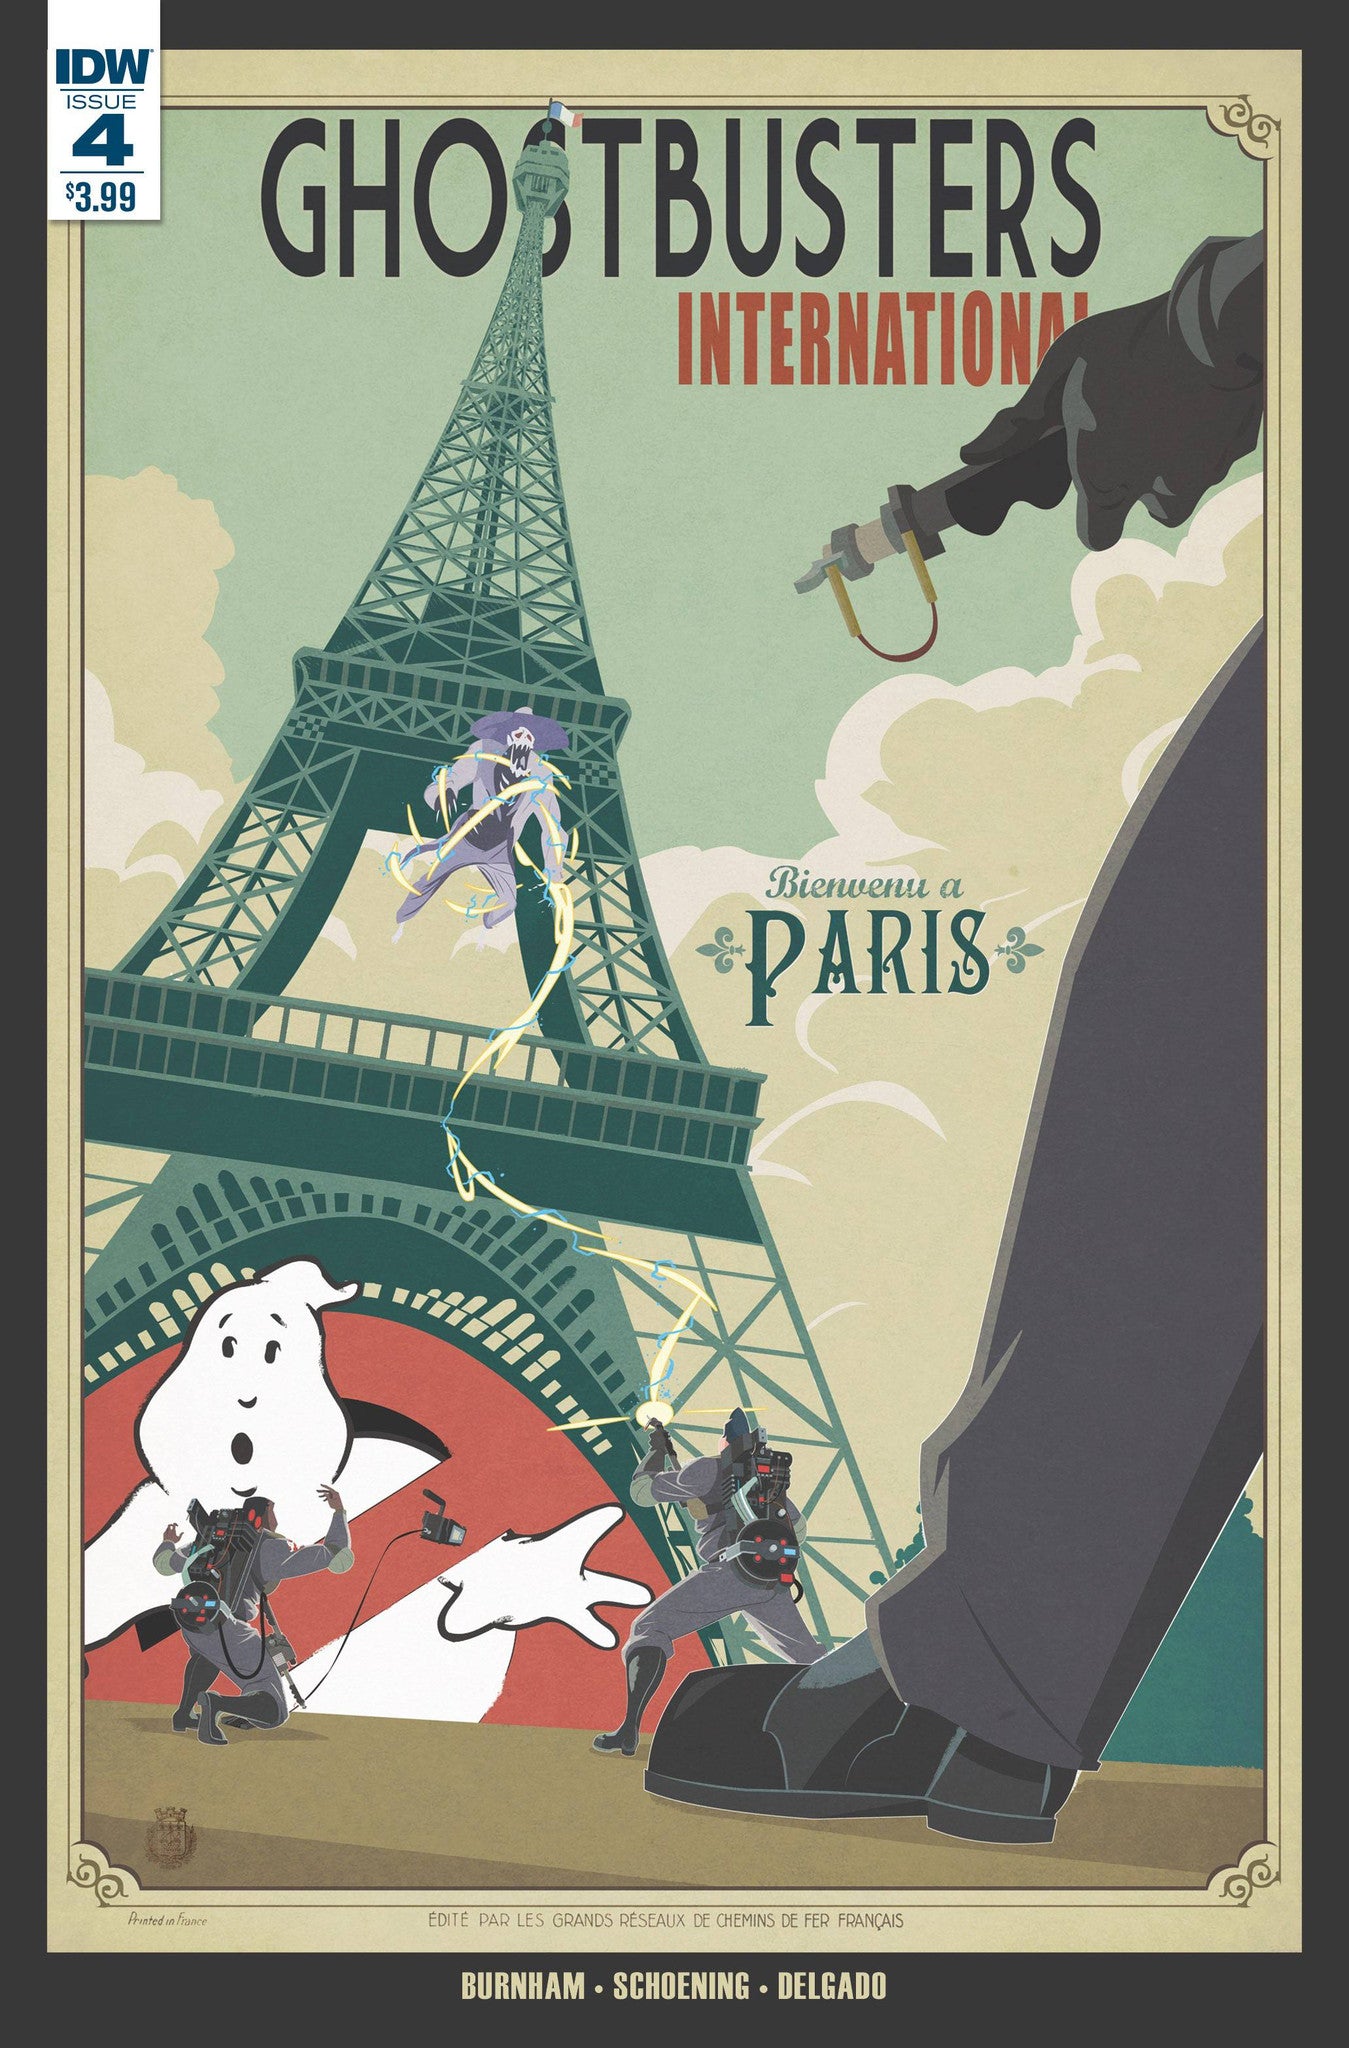 GHOSTBUSTERS INTERNATIONAL #4(OF 4) COVER